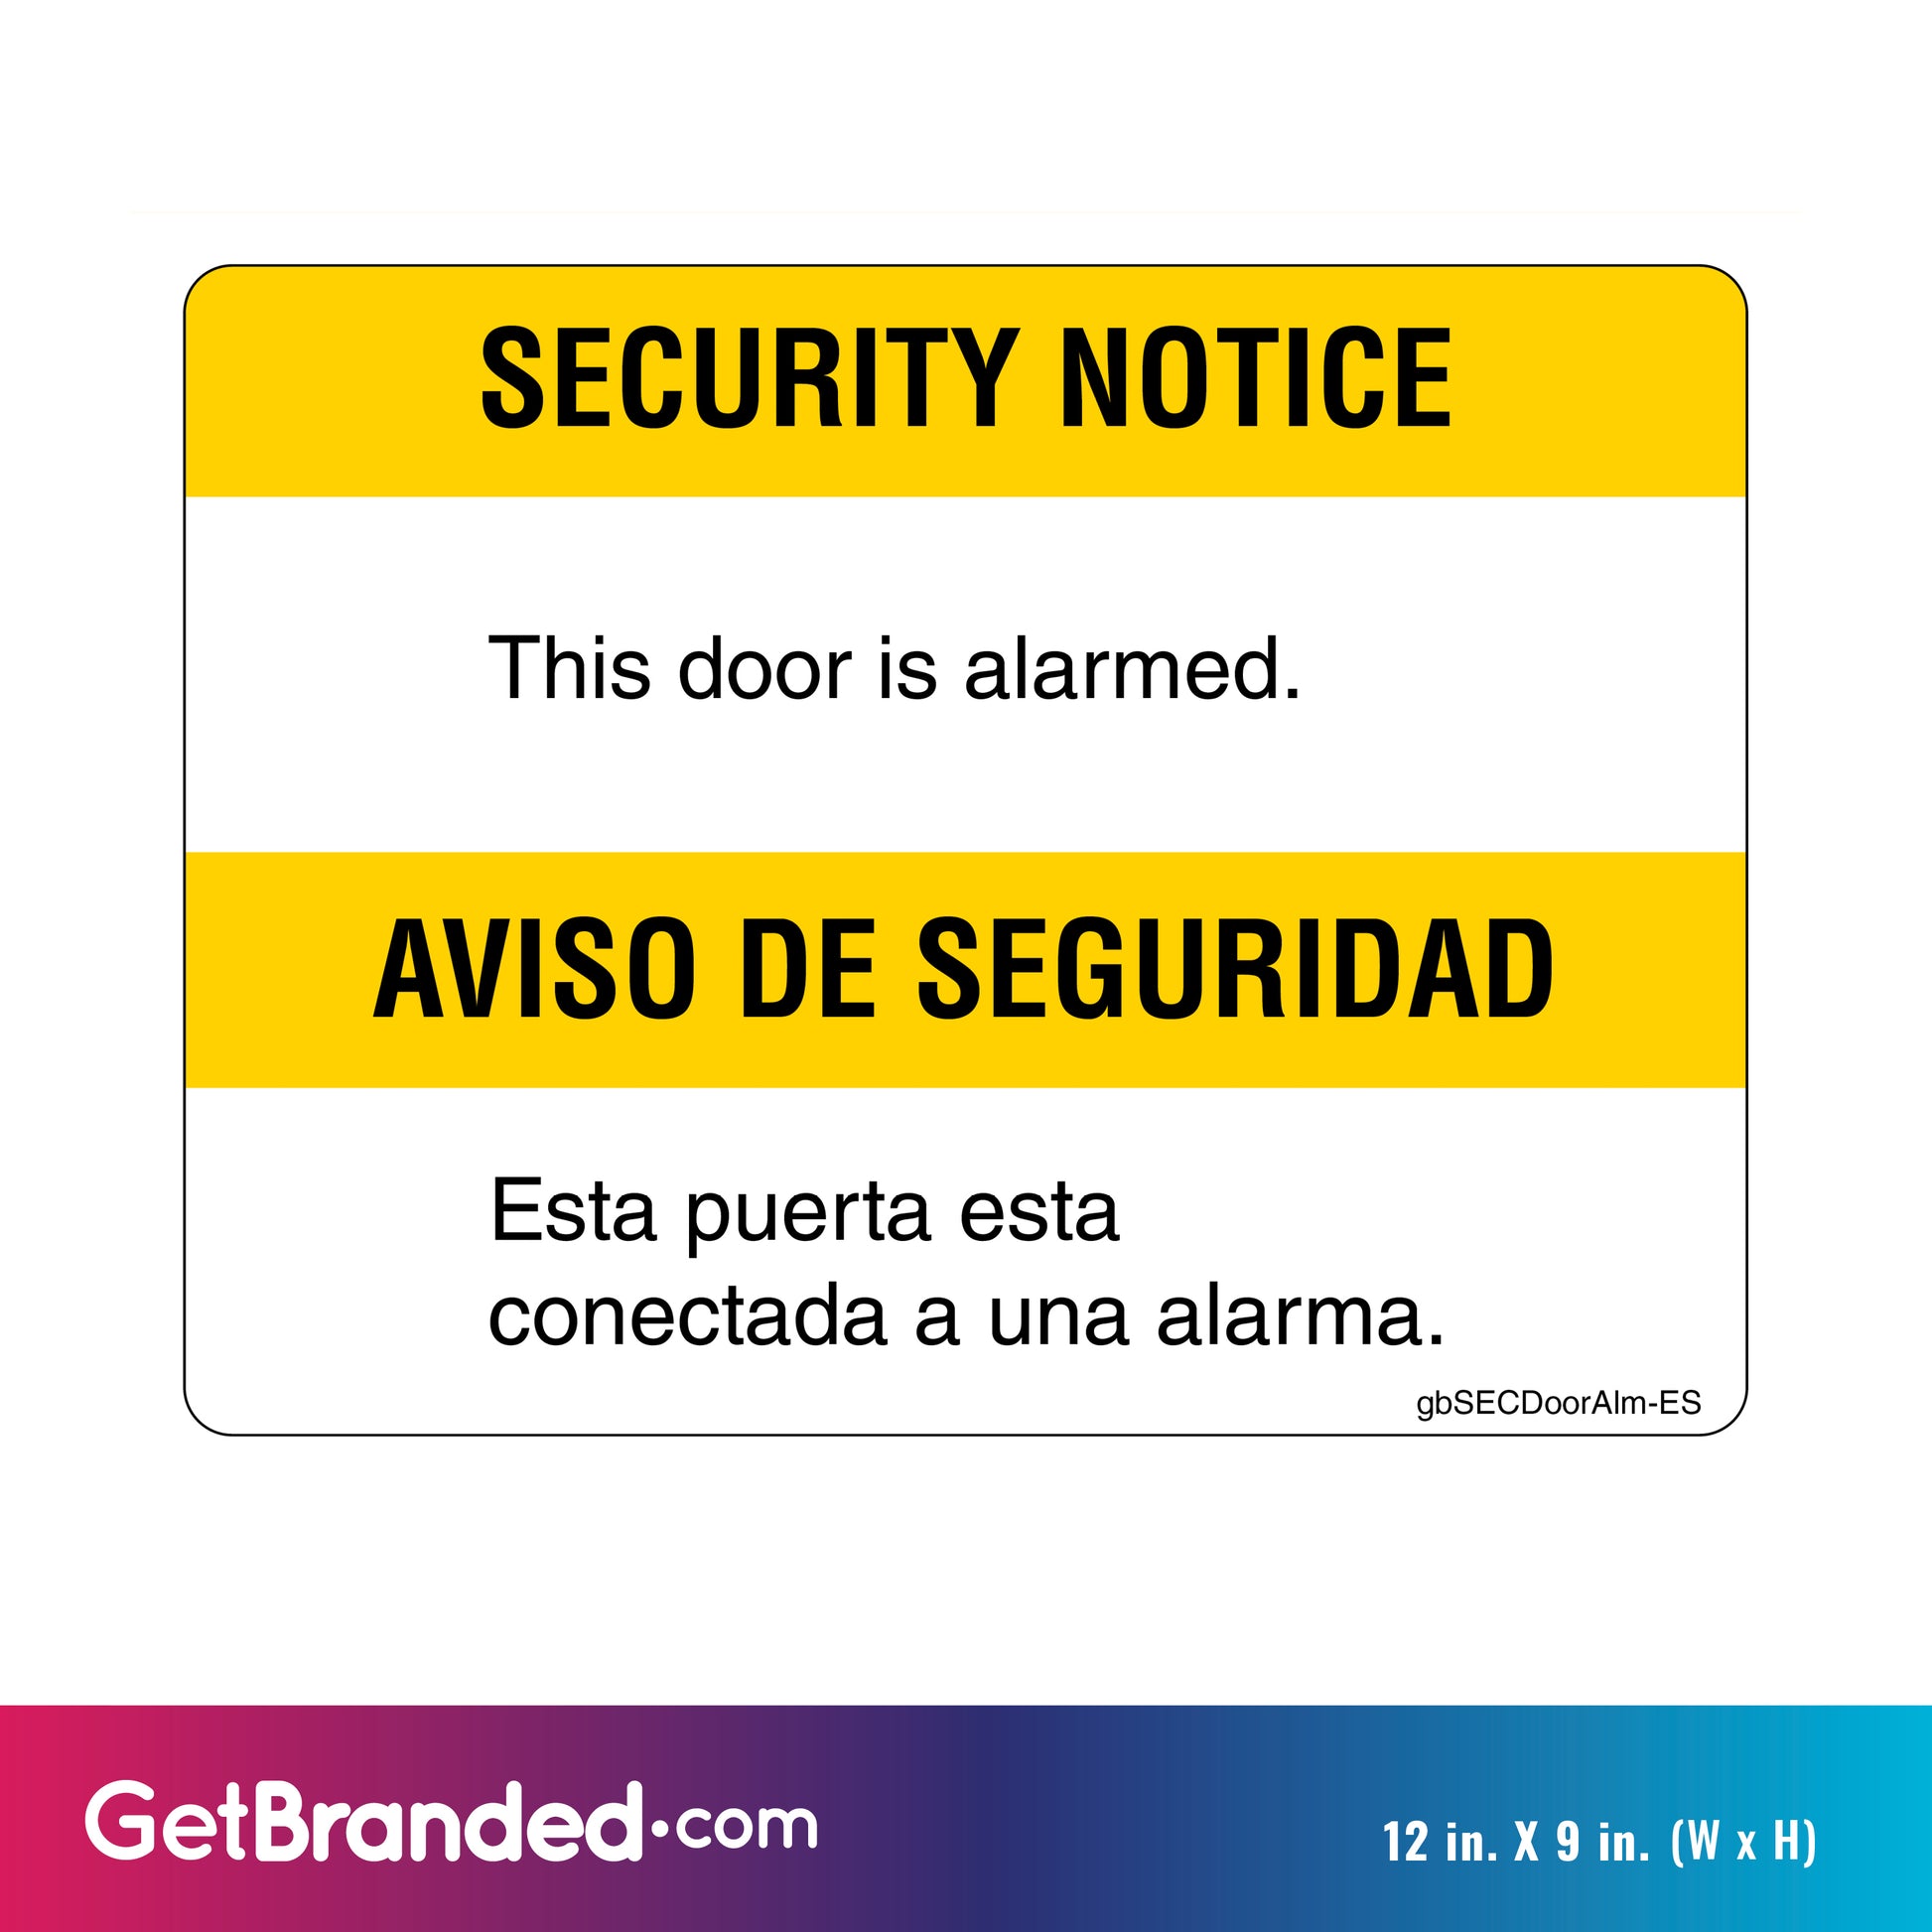 Security Notice, This Door Alarmed Decal in English and Spanish. 12 inches by 9 inches in size.